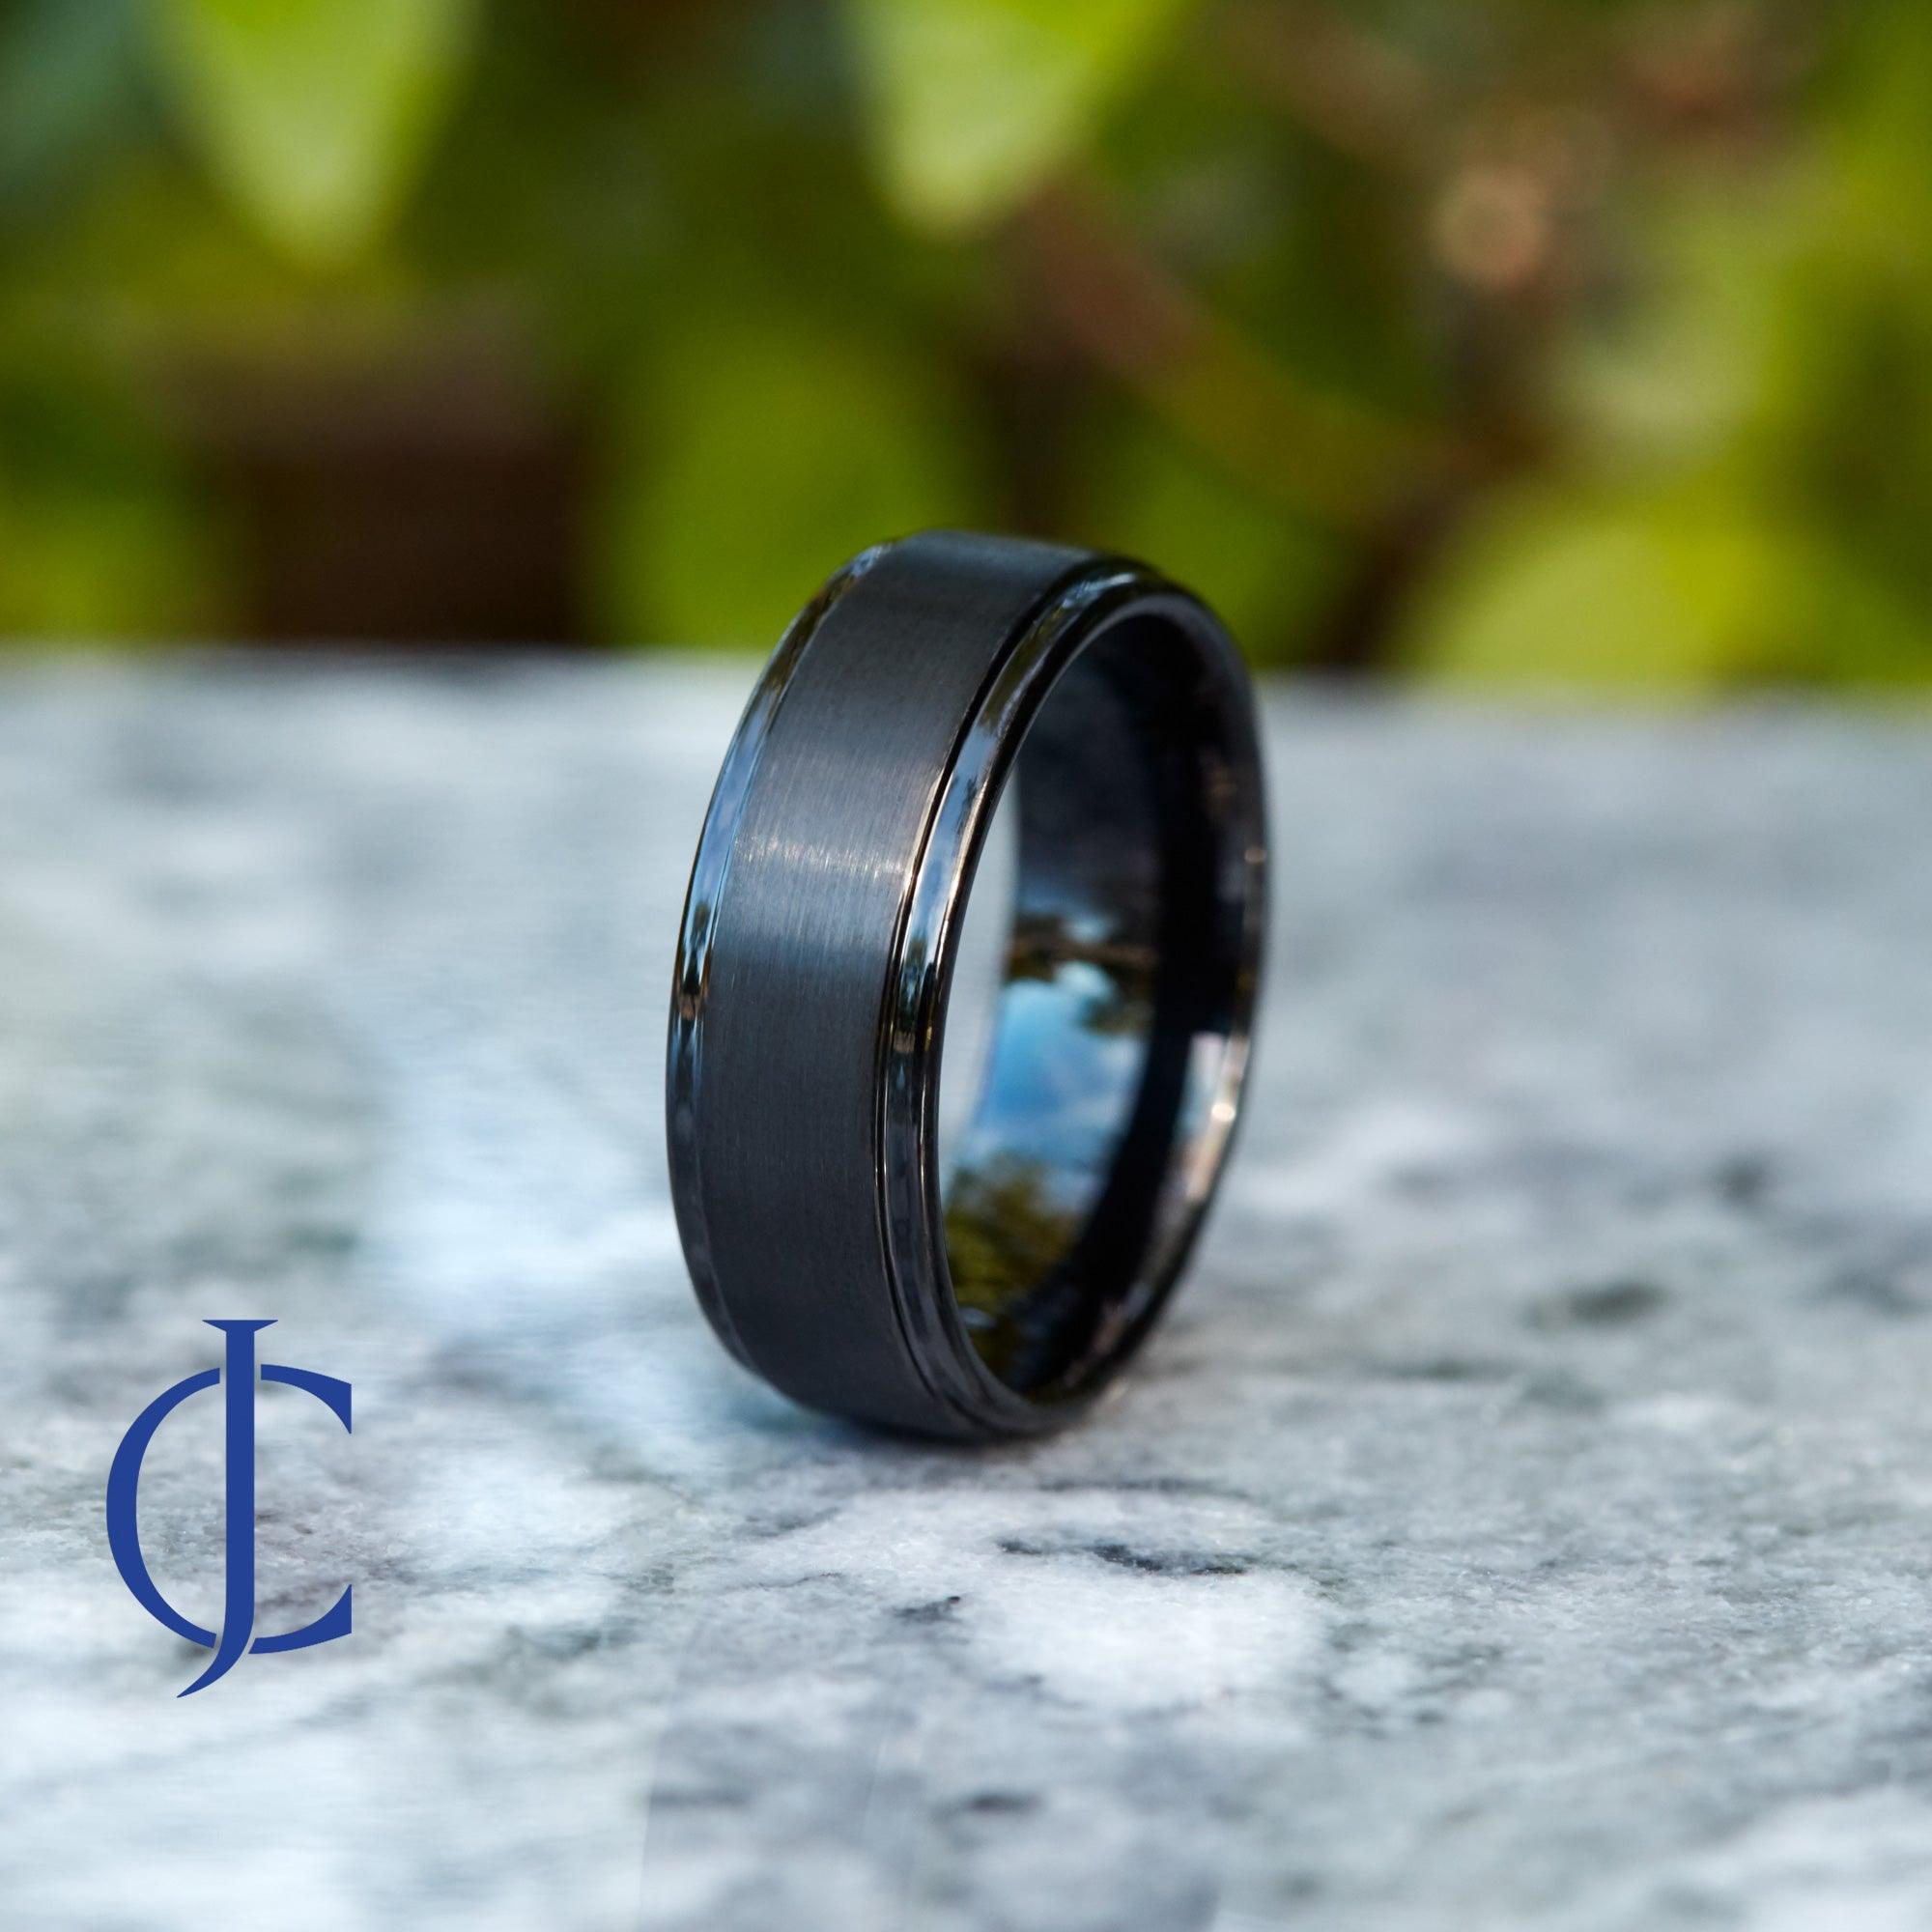 THE THUNDER BLACK Black plated Tungsten Ring - 8mm